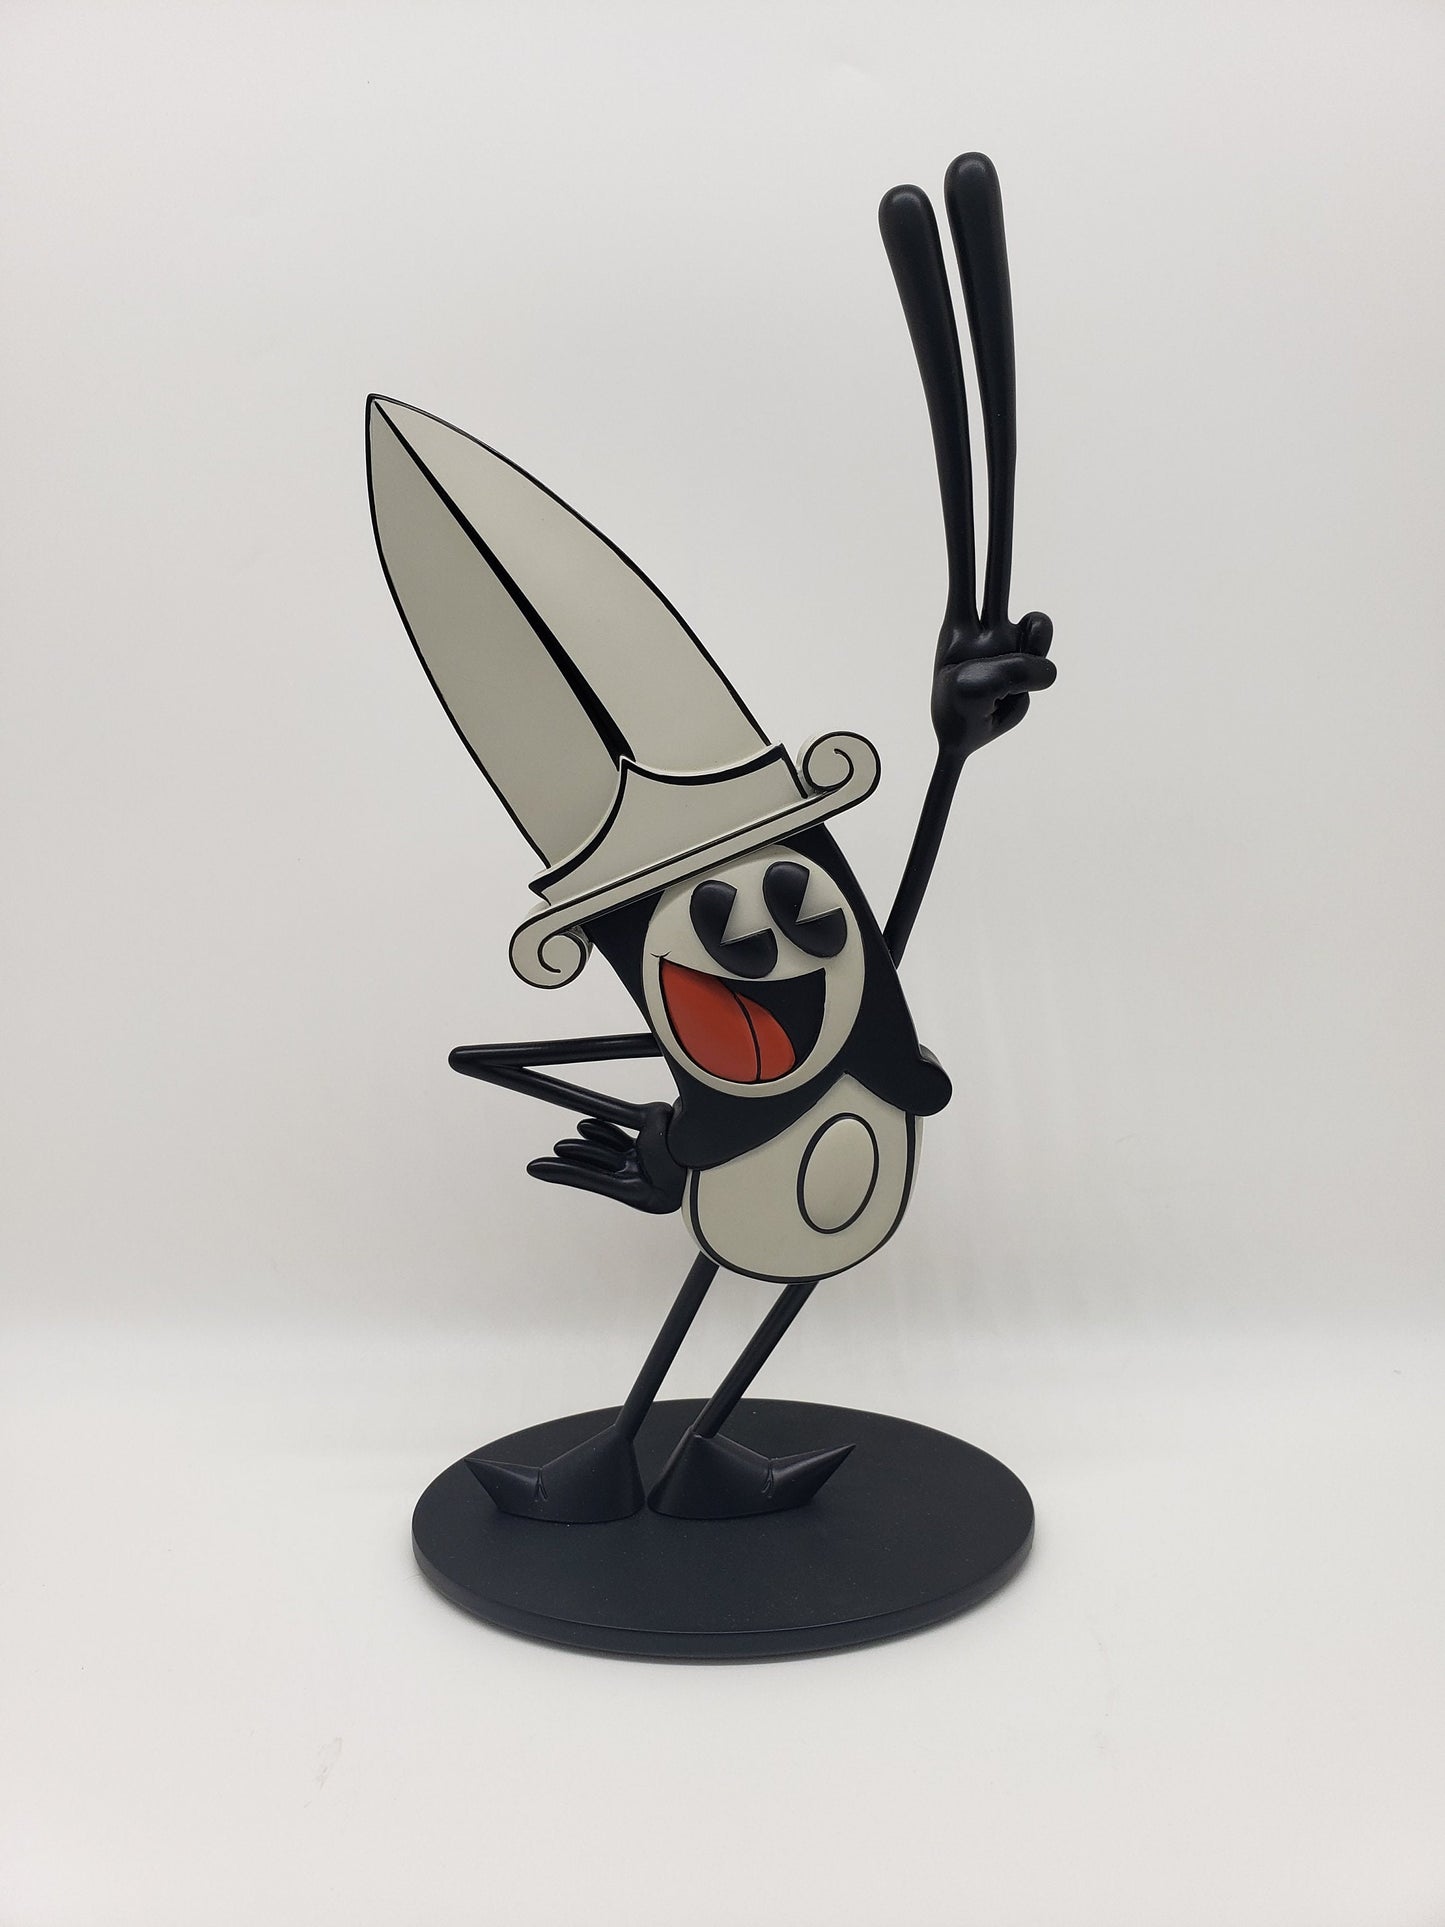 STABBY Unruly Industries Collectible Designer Toy Figure by artist Greg “Craola” Simkins